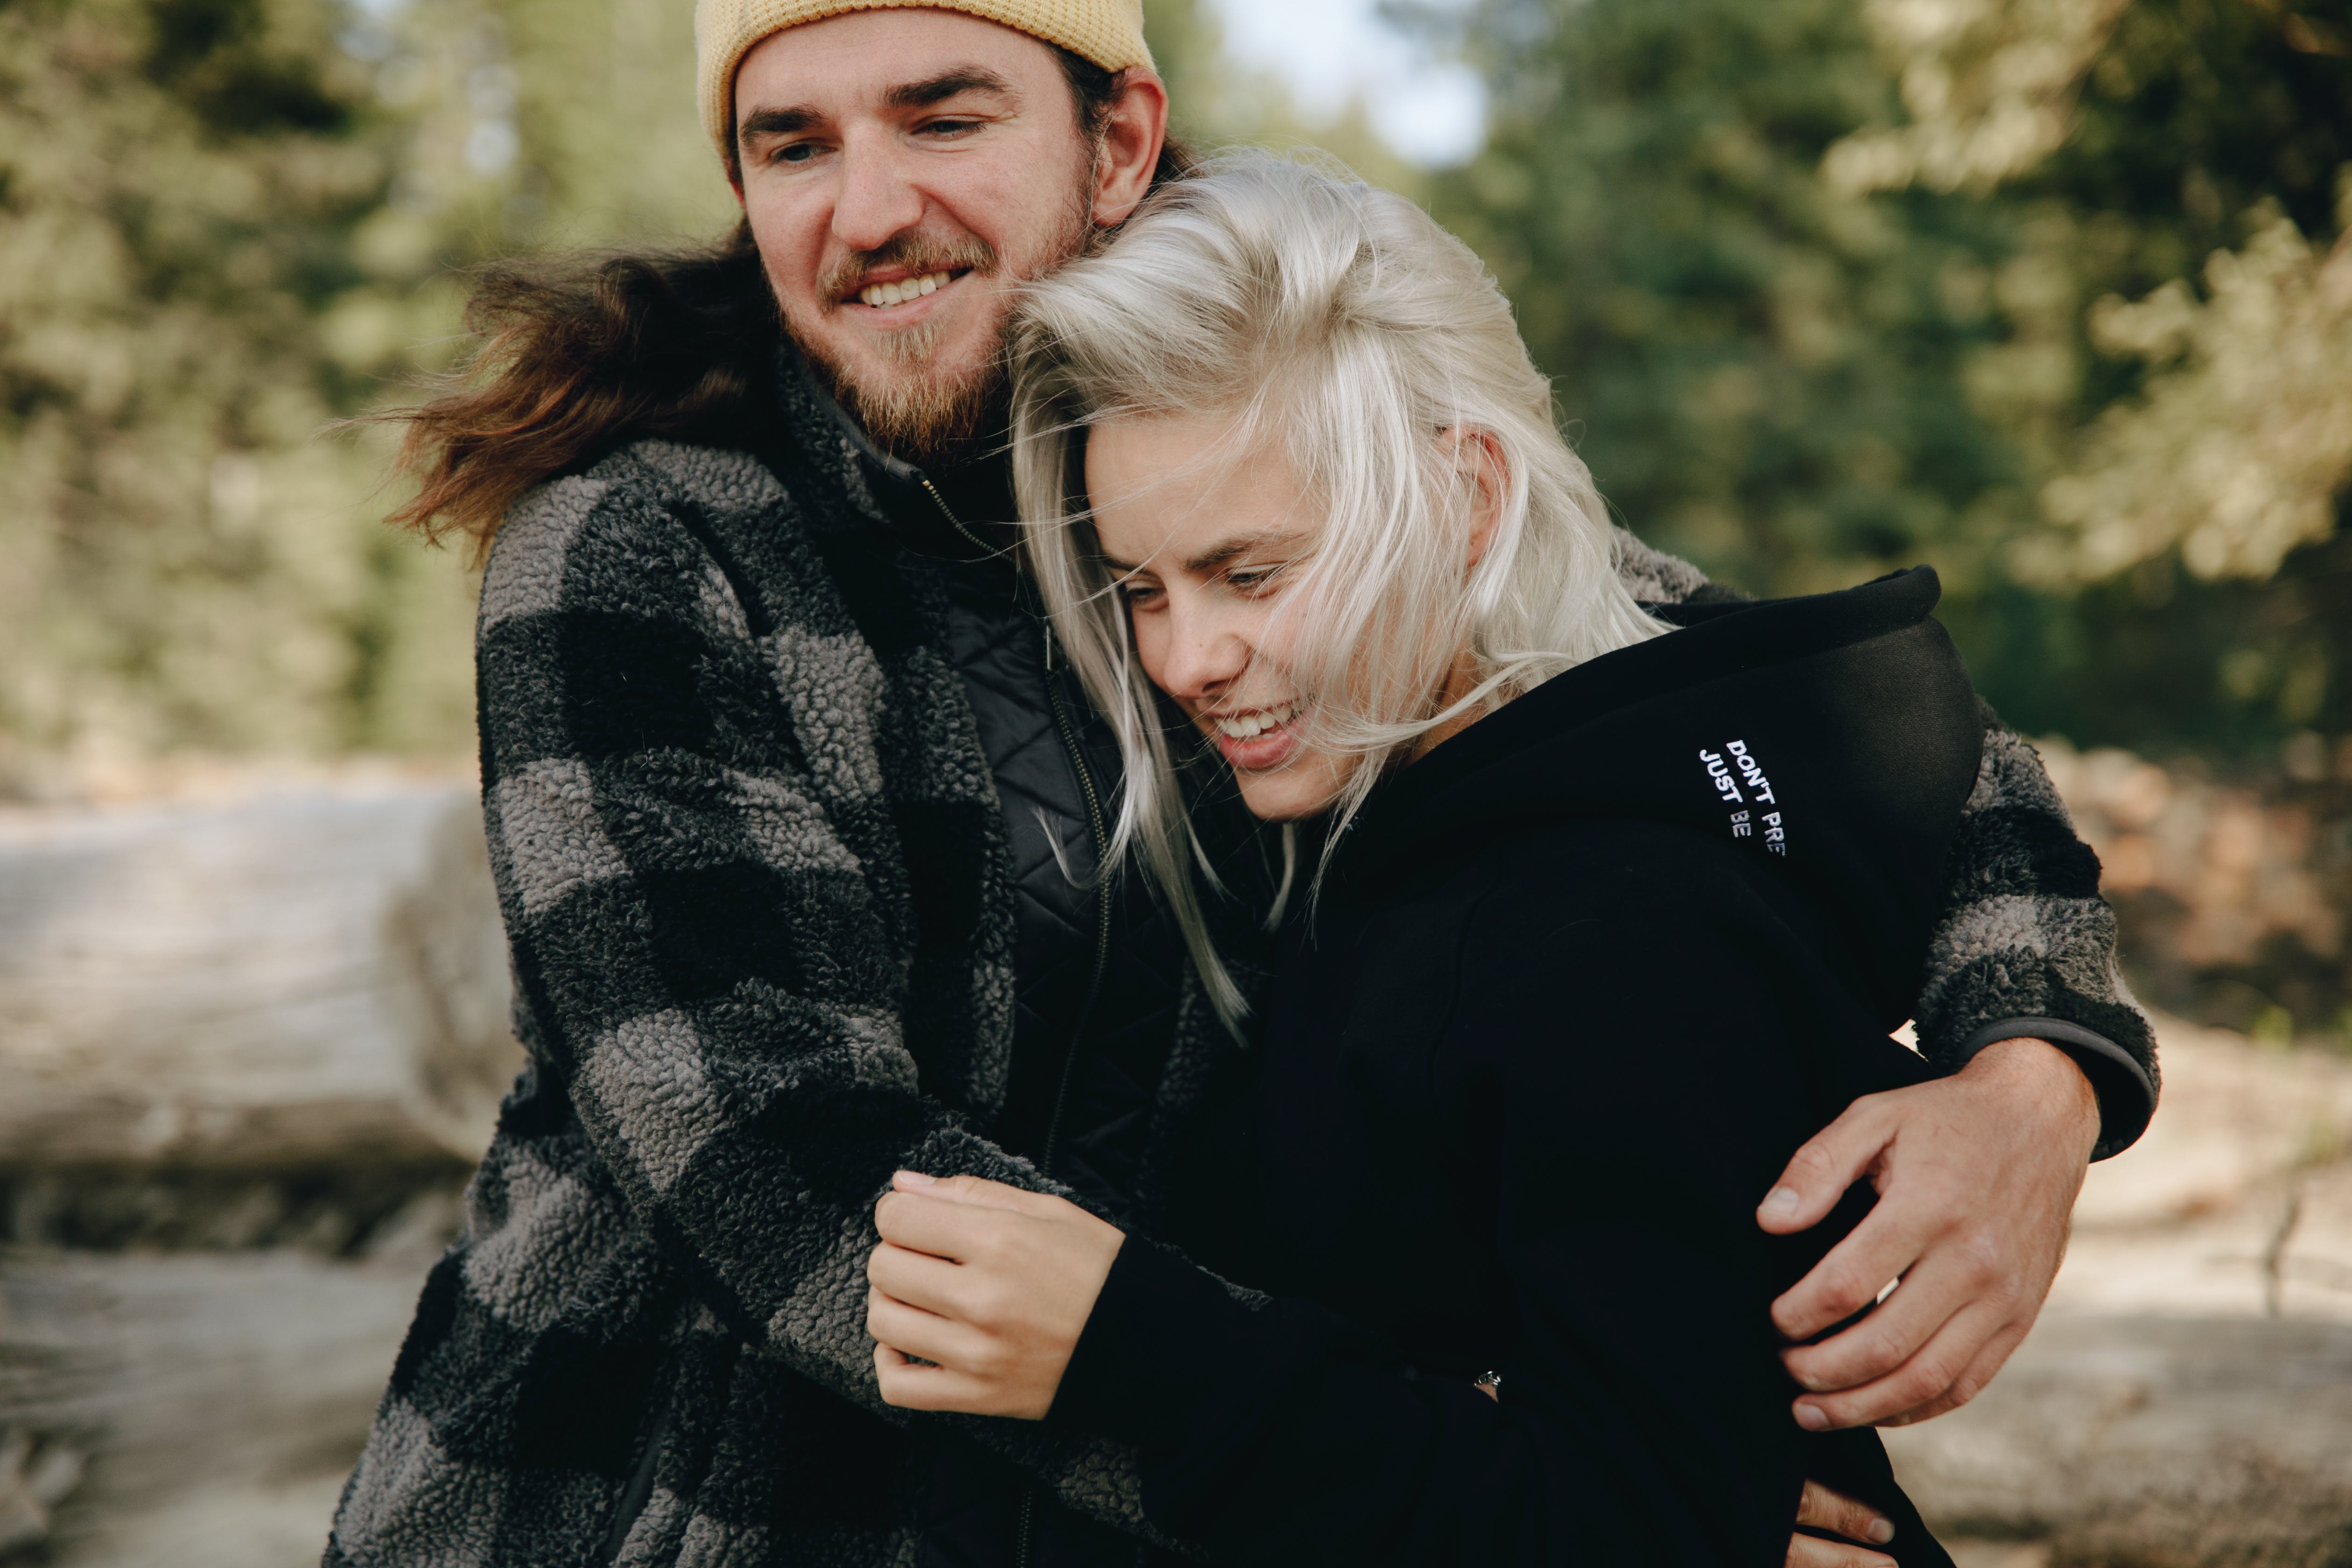 A young couple embracing | Source: Pexels